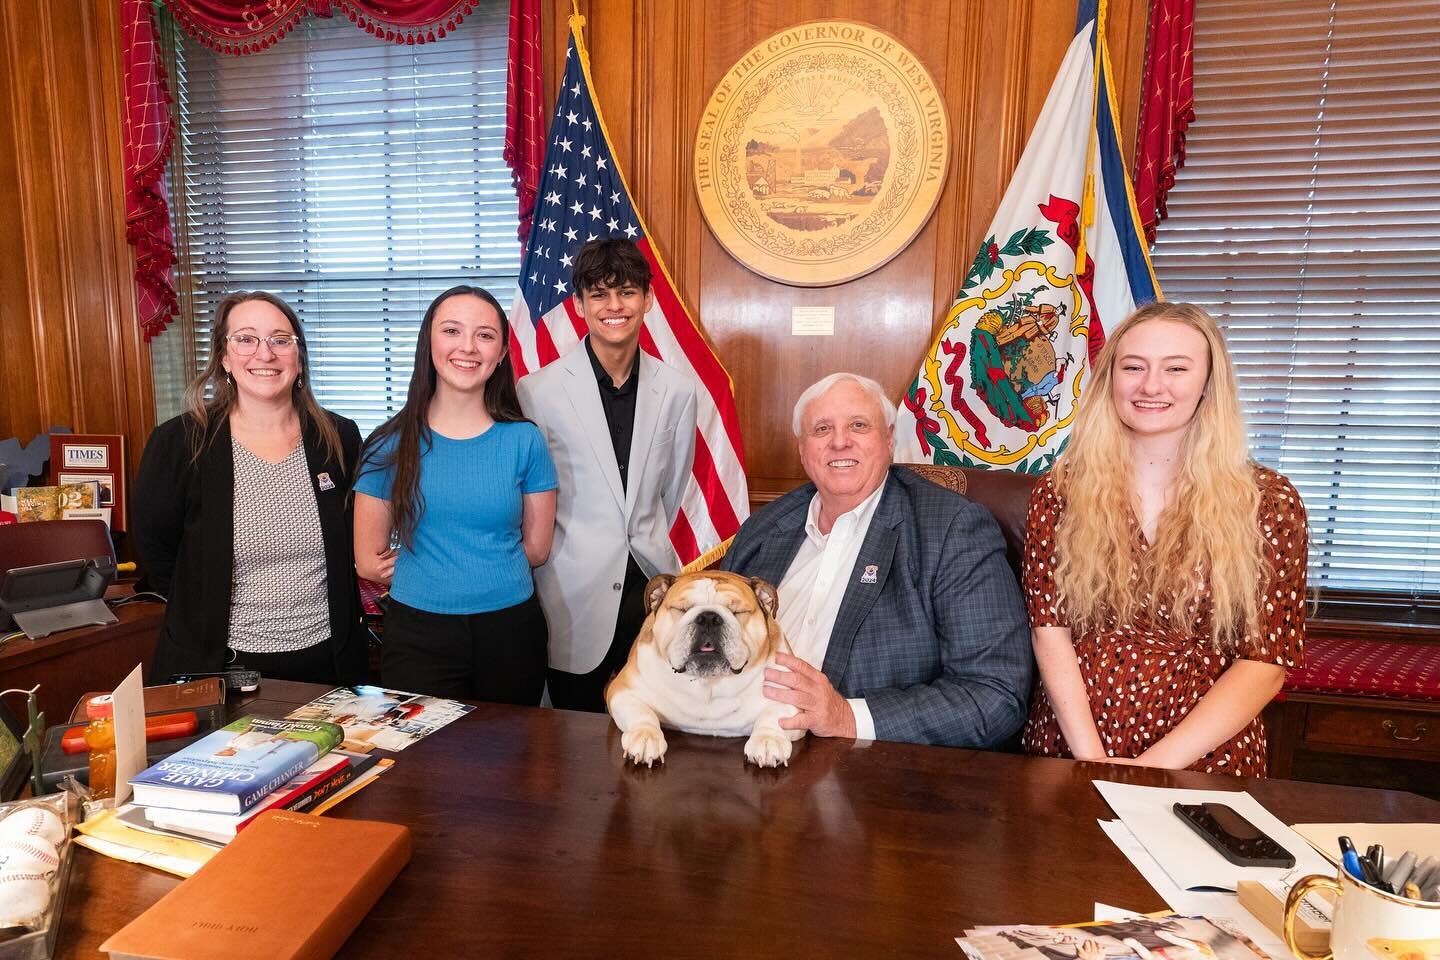 On Wednesday April 3rd, State Parliamentarian Ali Neff presented this years WV FBLA state pin to Governor Jim Justice. The Pin was designed by her. Also in attendance to the meeting was WV FBLA State Advisor Sarah Wamsley, WV FBLA Vice President Linc